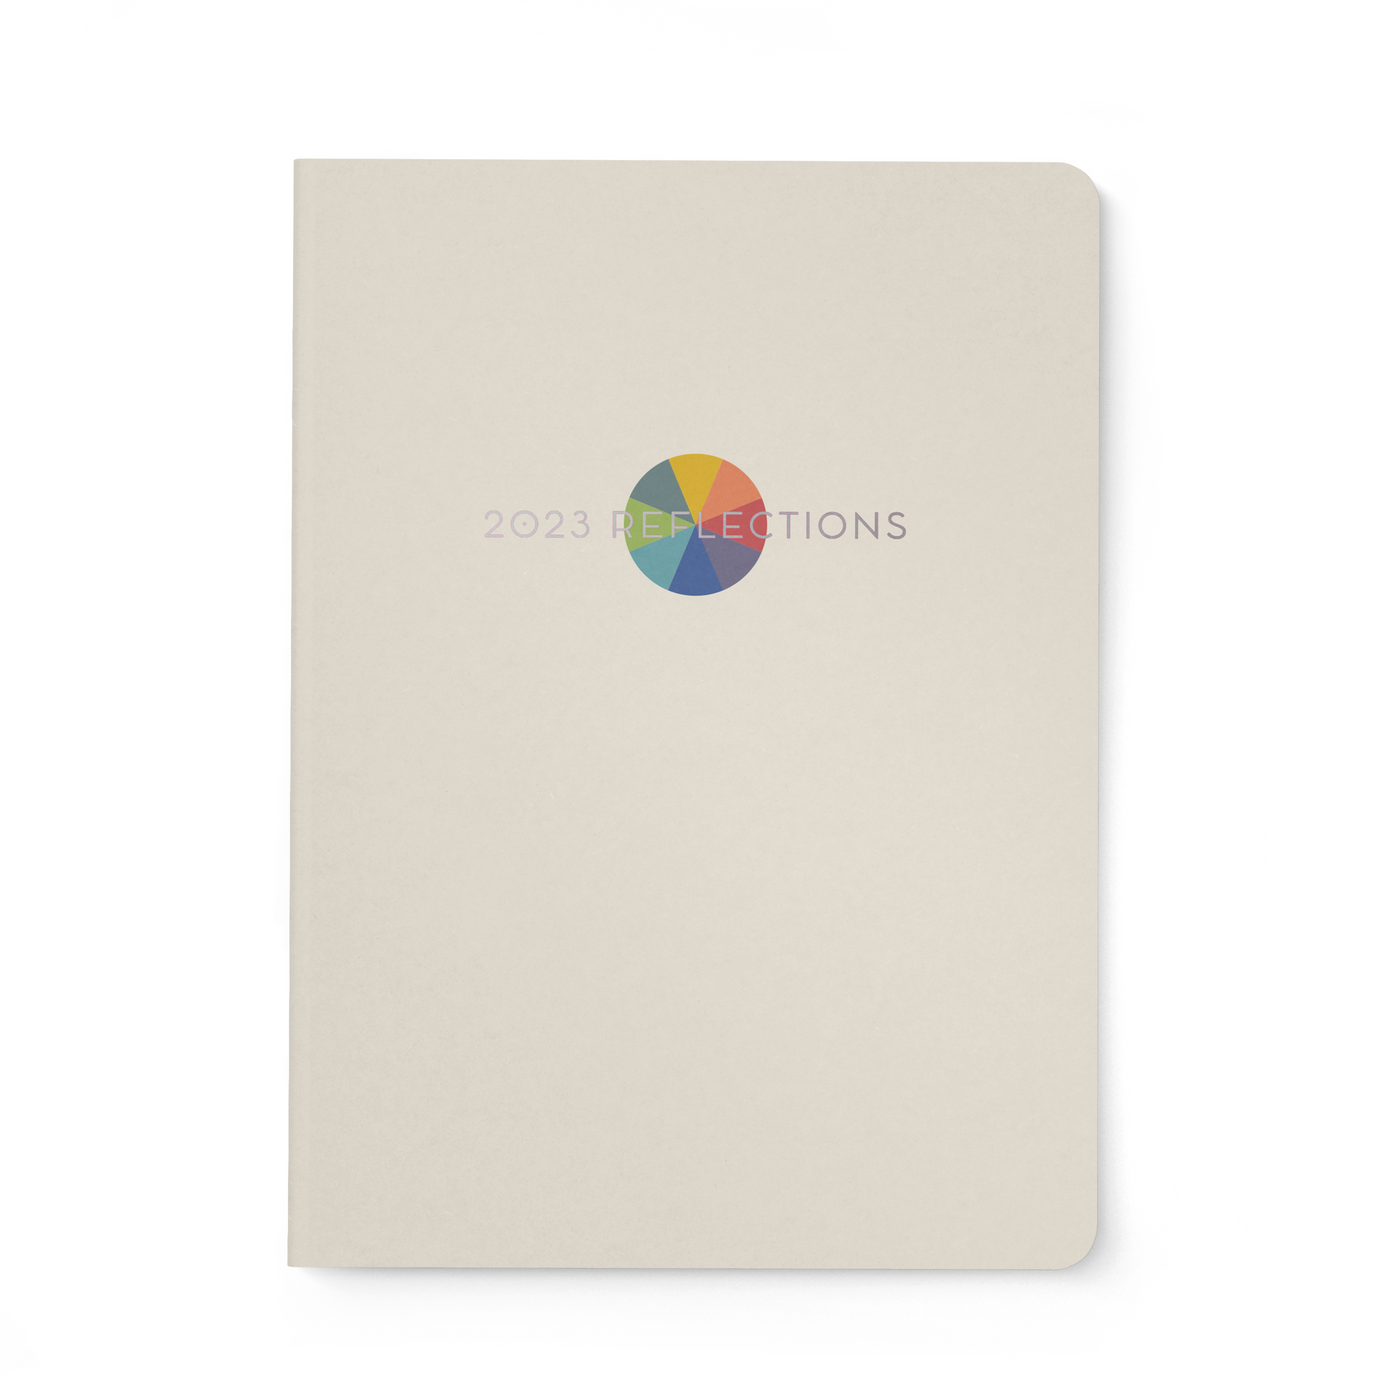 FREE GIFT WITH PURCHASE (NOT FOR SALE) 2023 Reflections Notebook